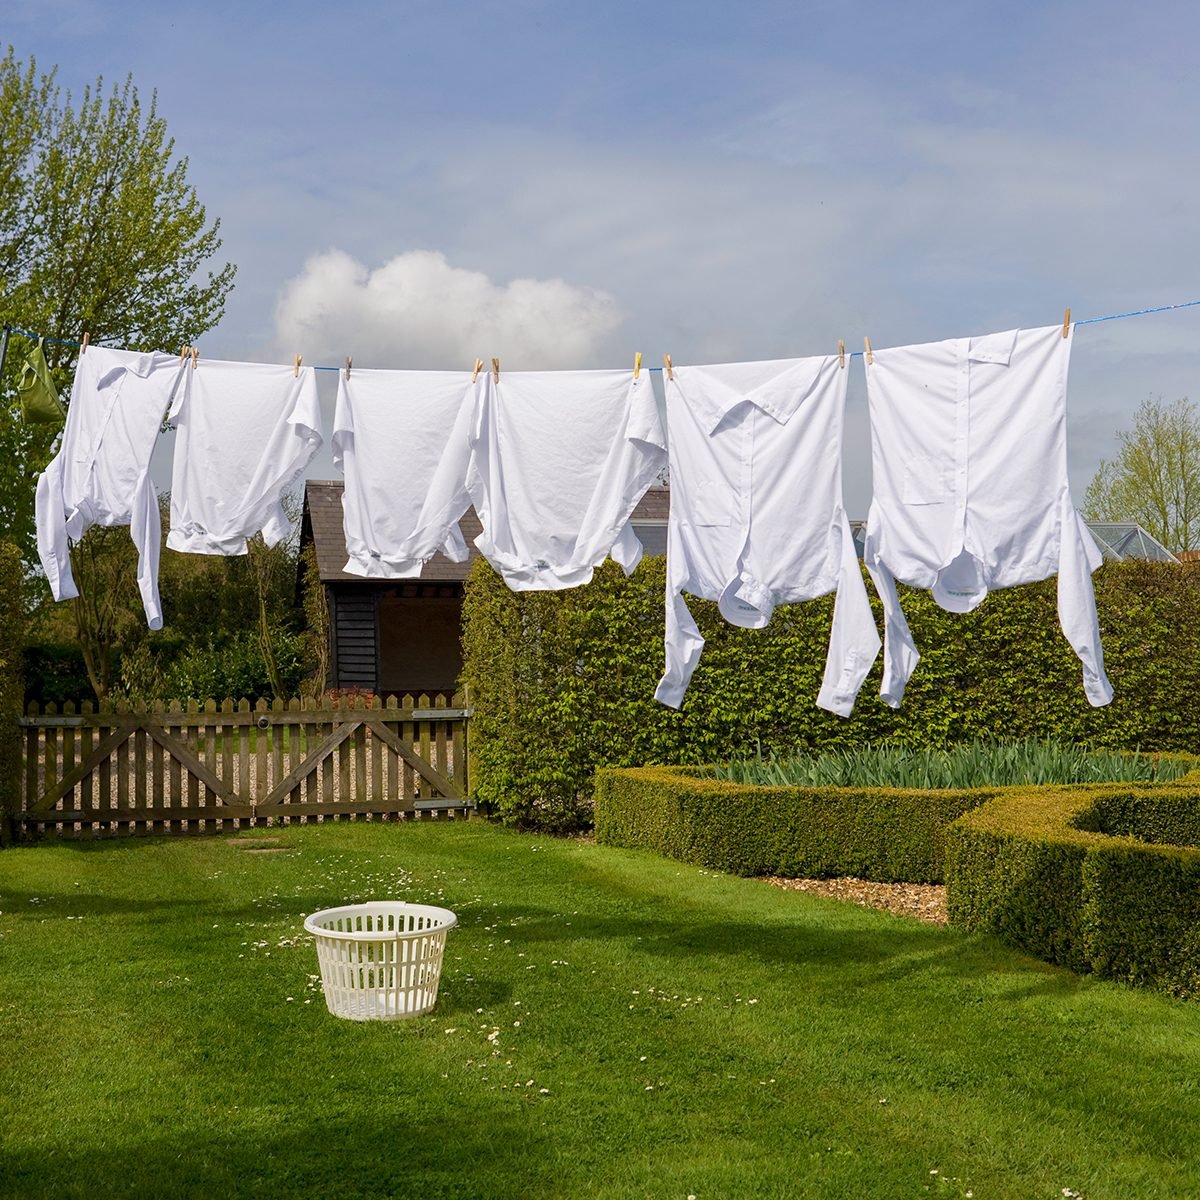 How To Make Your Laundry More Sustainable